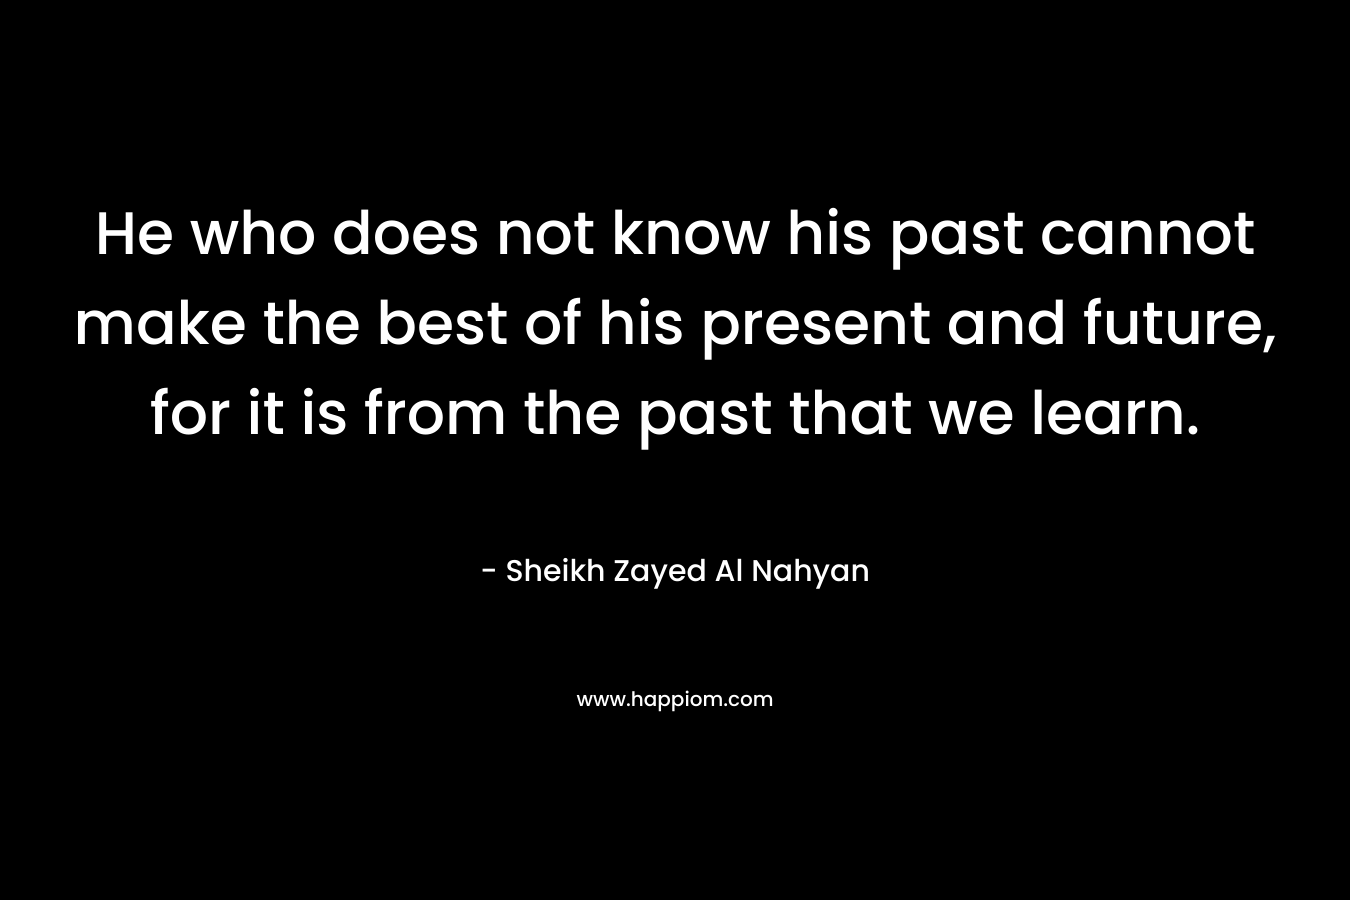 He who does not know his past cannot make the best of his present and future, for it is from the past that we learn.